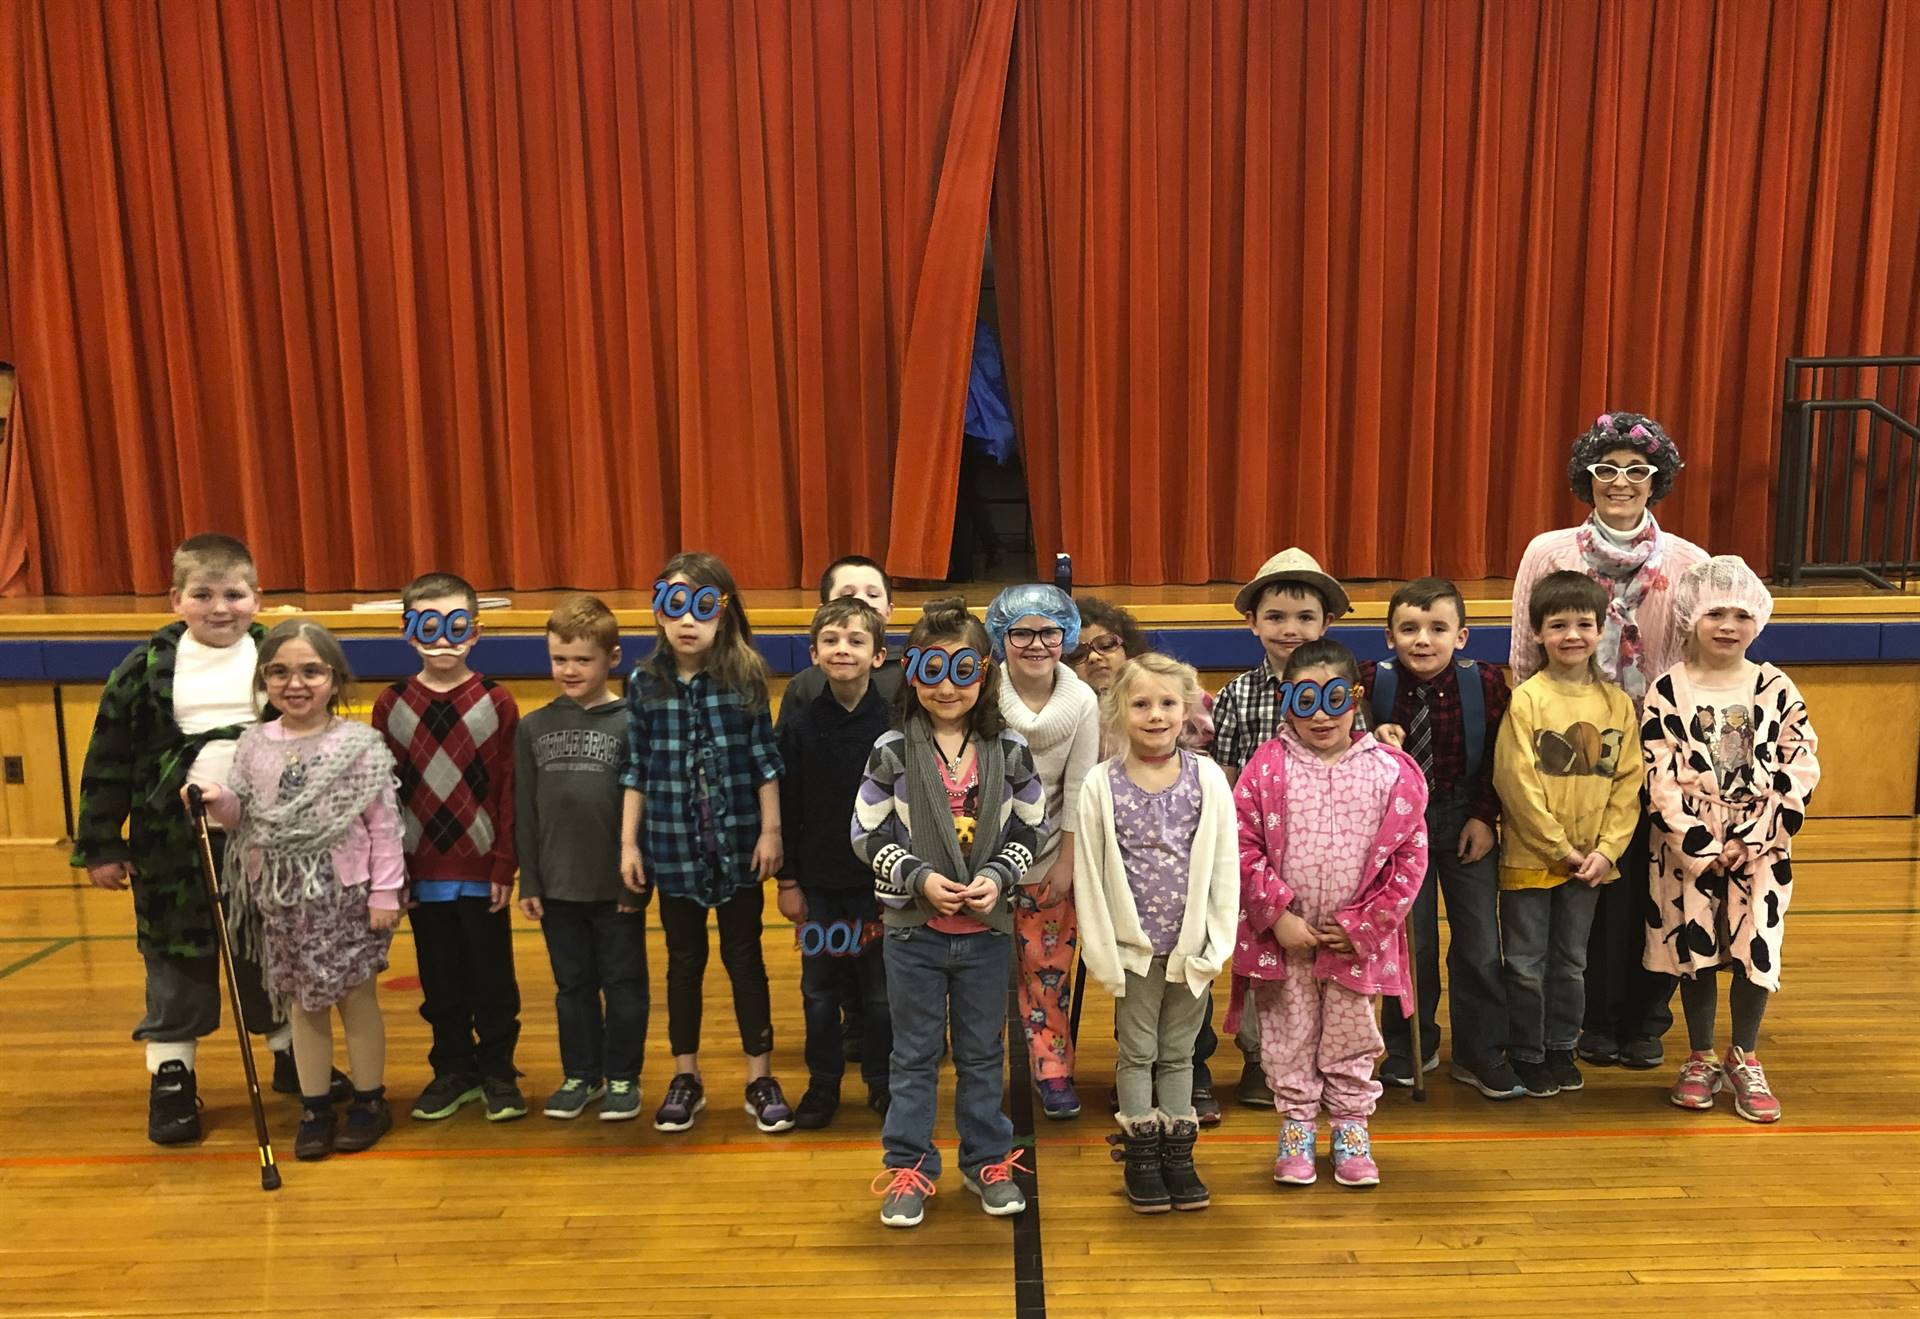 A teacher and her class on 100th day of school.